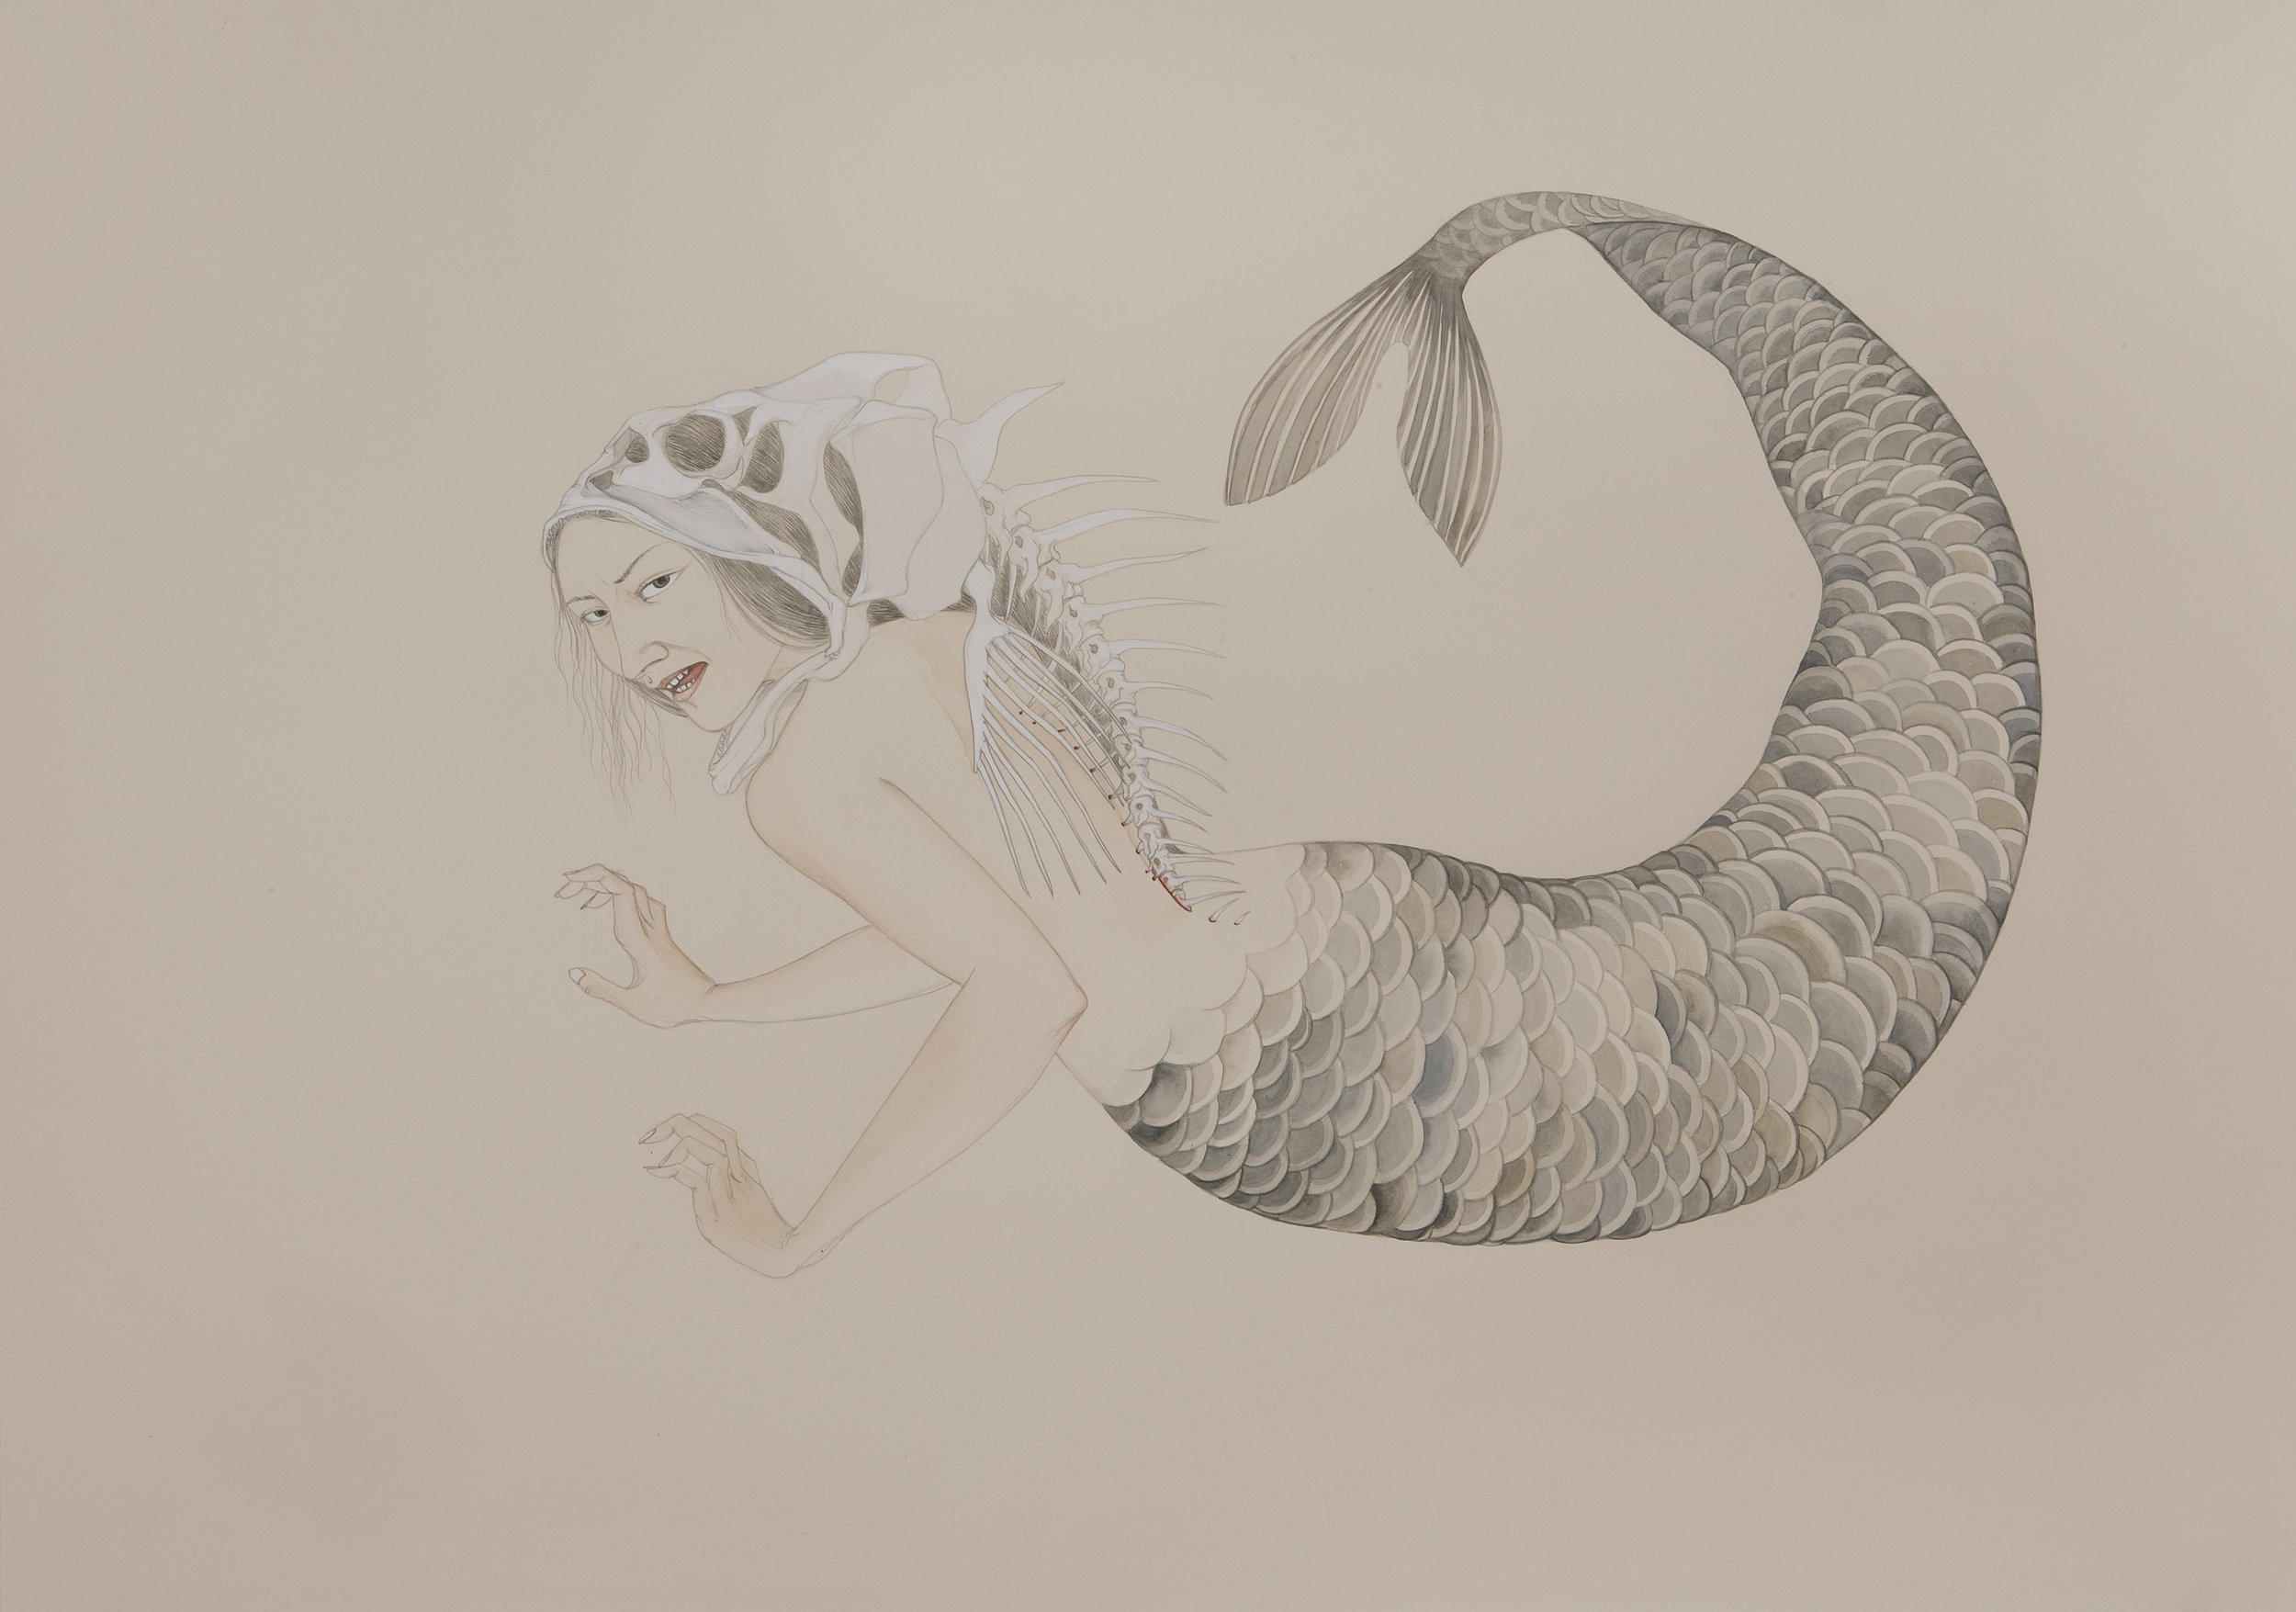   Mermaid , 2009 Graphite, ink, watercolor on cream-colored paper 27.5 x 39 inches Private Collection&nbsp;  